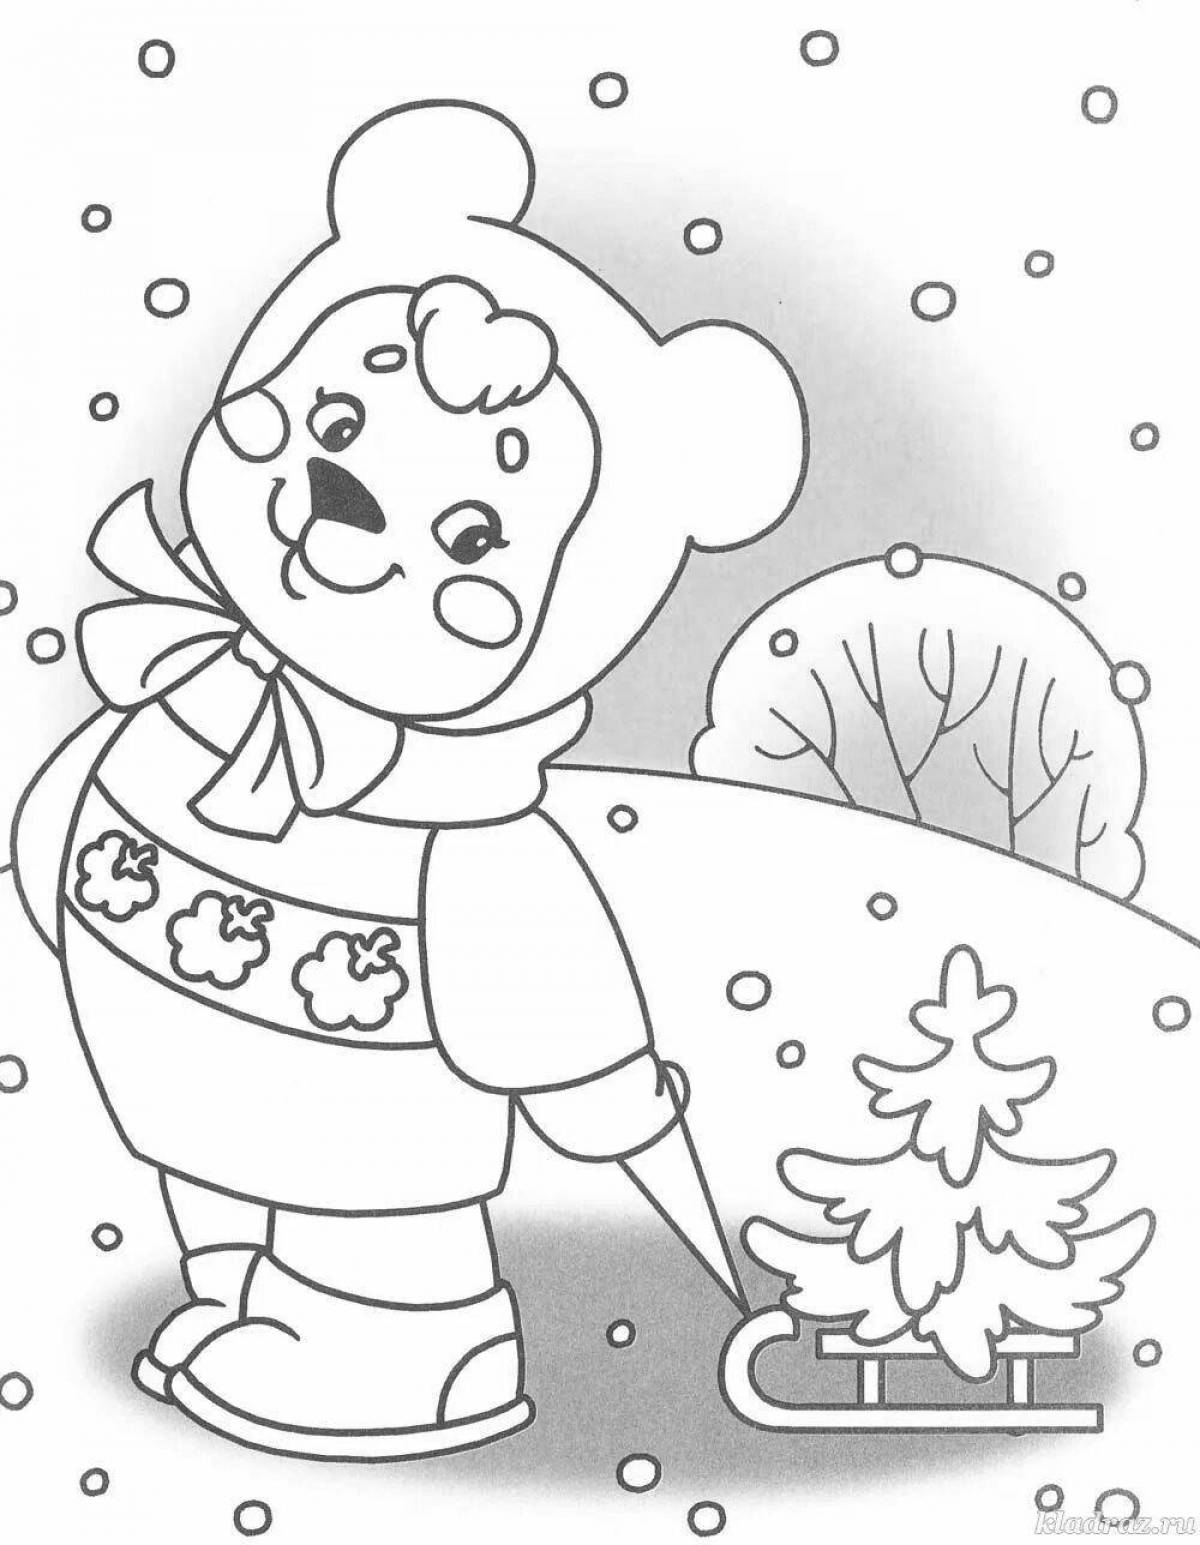 Amazing 5 year old winter coloring book